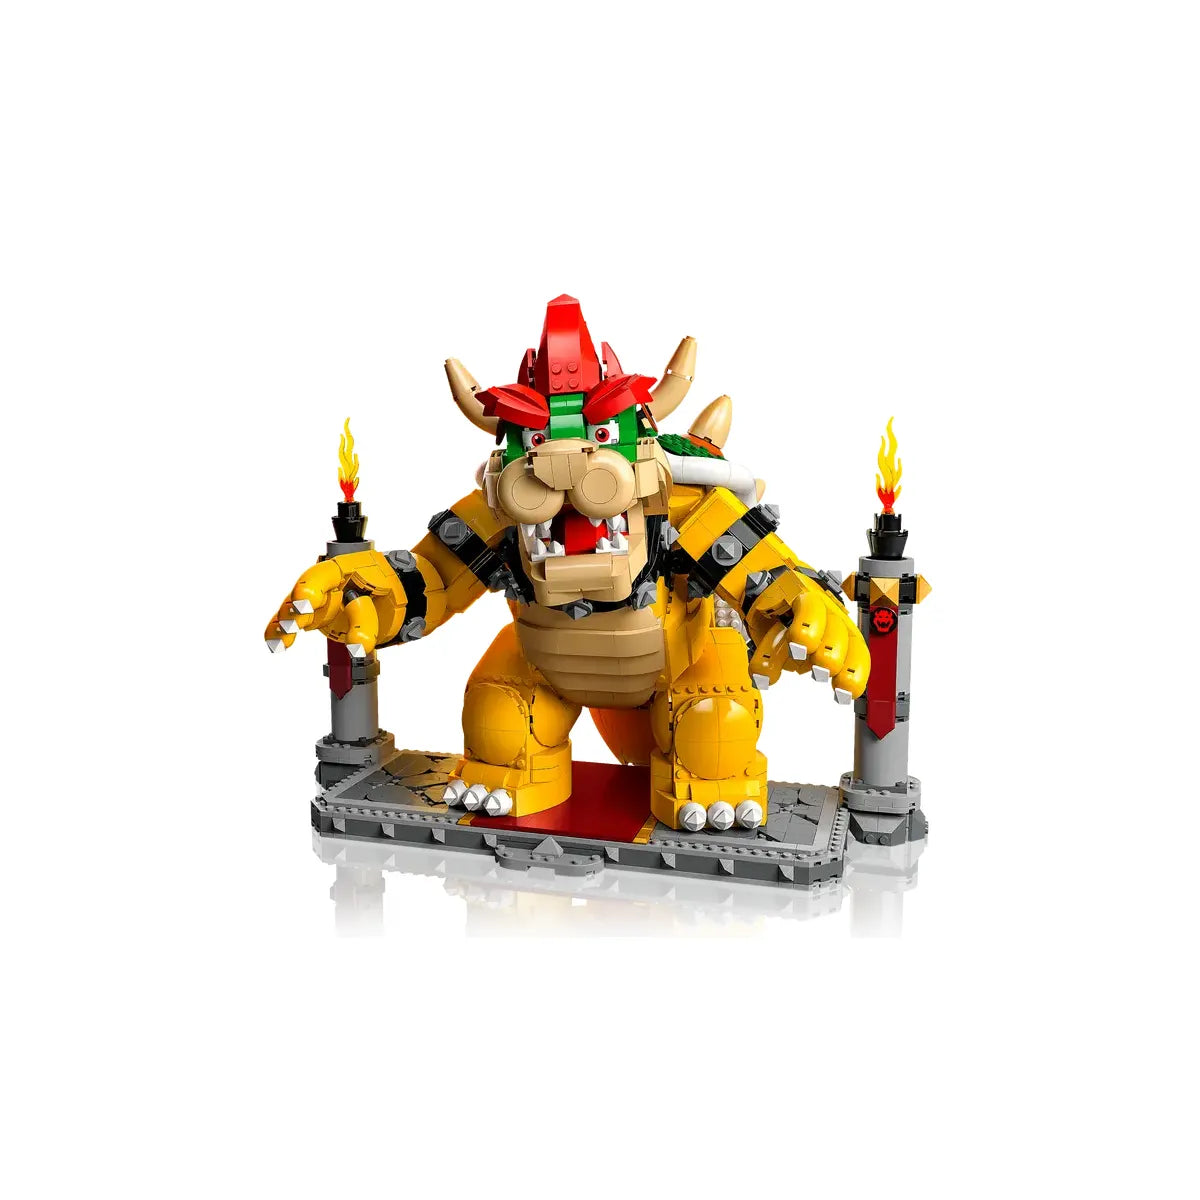 LEGO 71411 Super Mario The Powerful Bowser, Adult Building Model Kit, Collectible 3D Jointed Figure with Battle Base, Gadget Gift Ideas for Men and Women